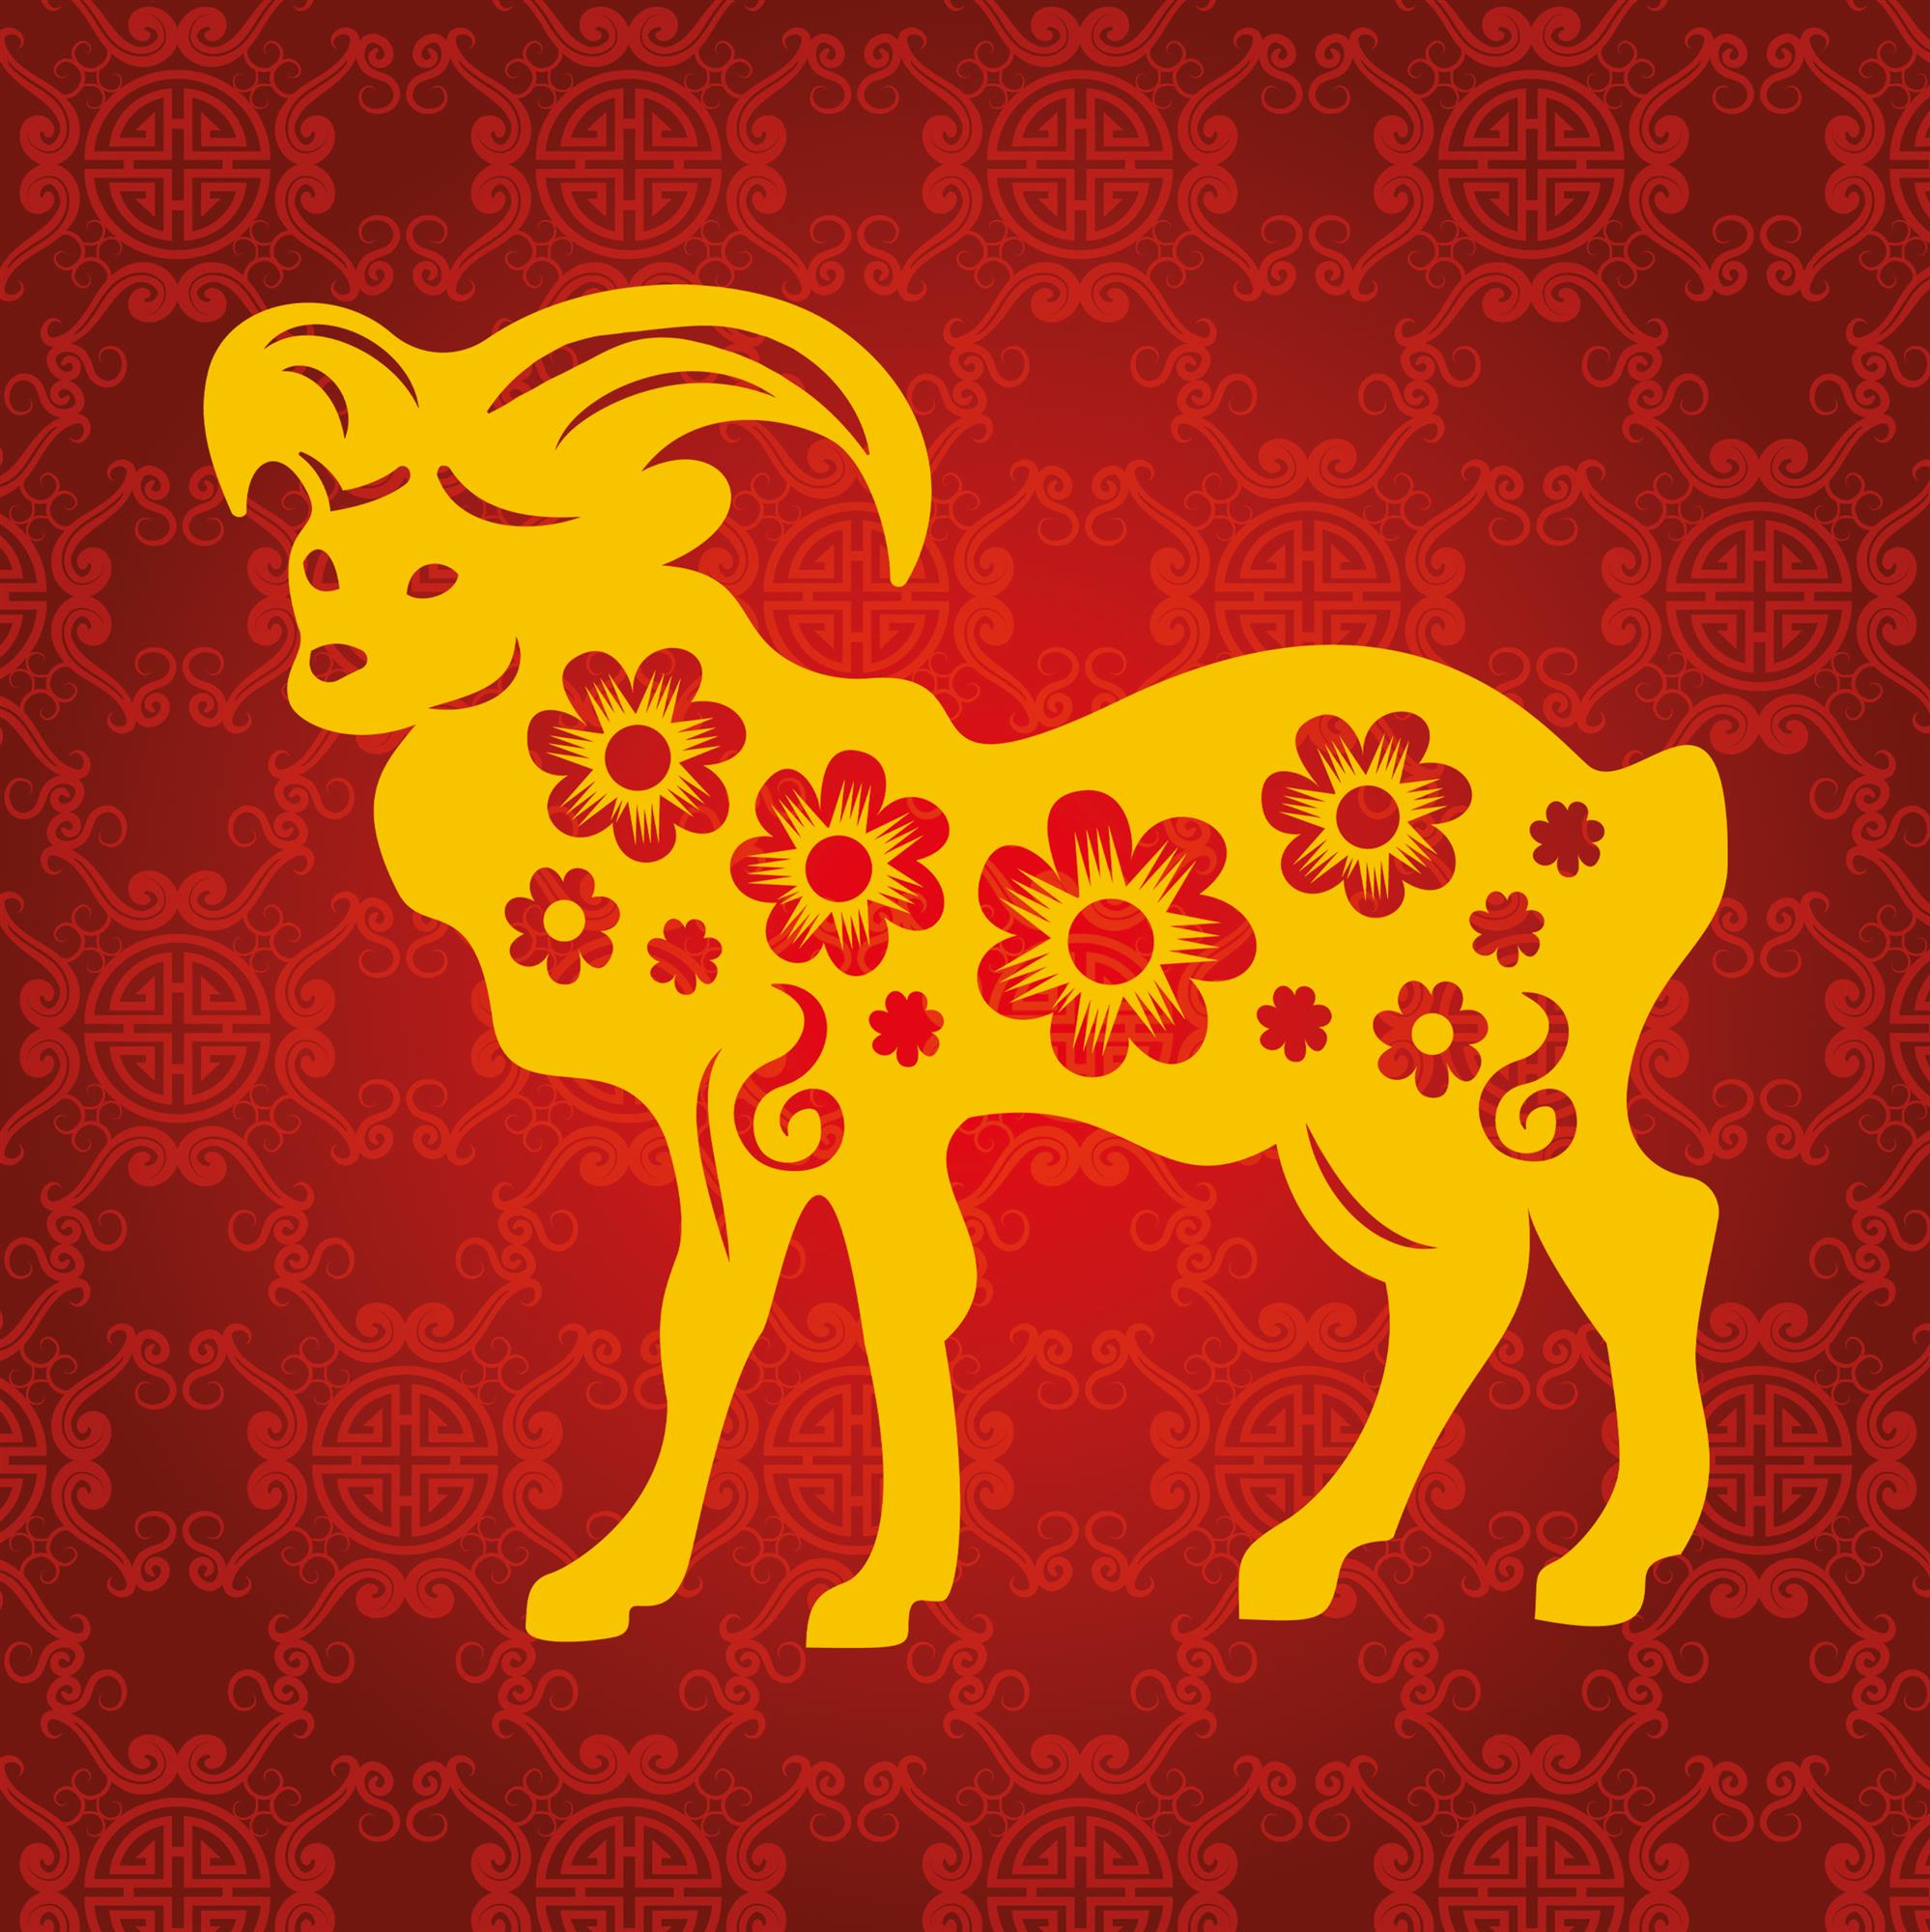 A red and yellow chinese style illustration of a goat